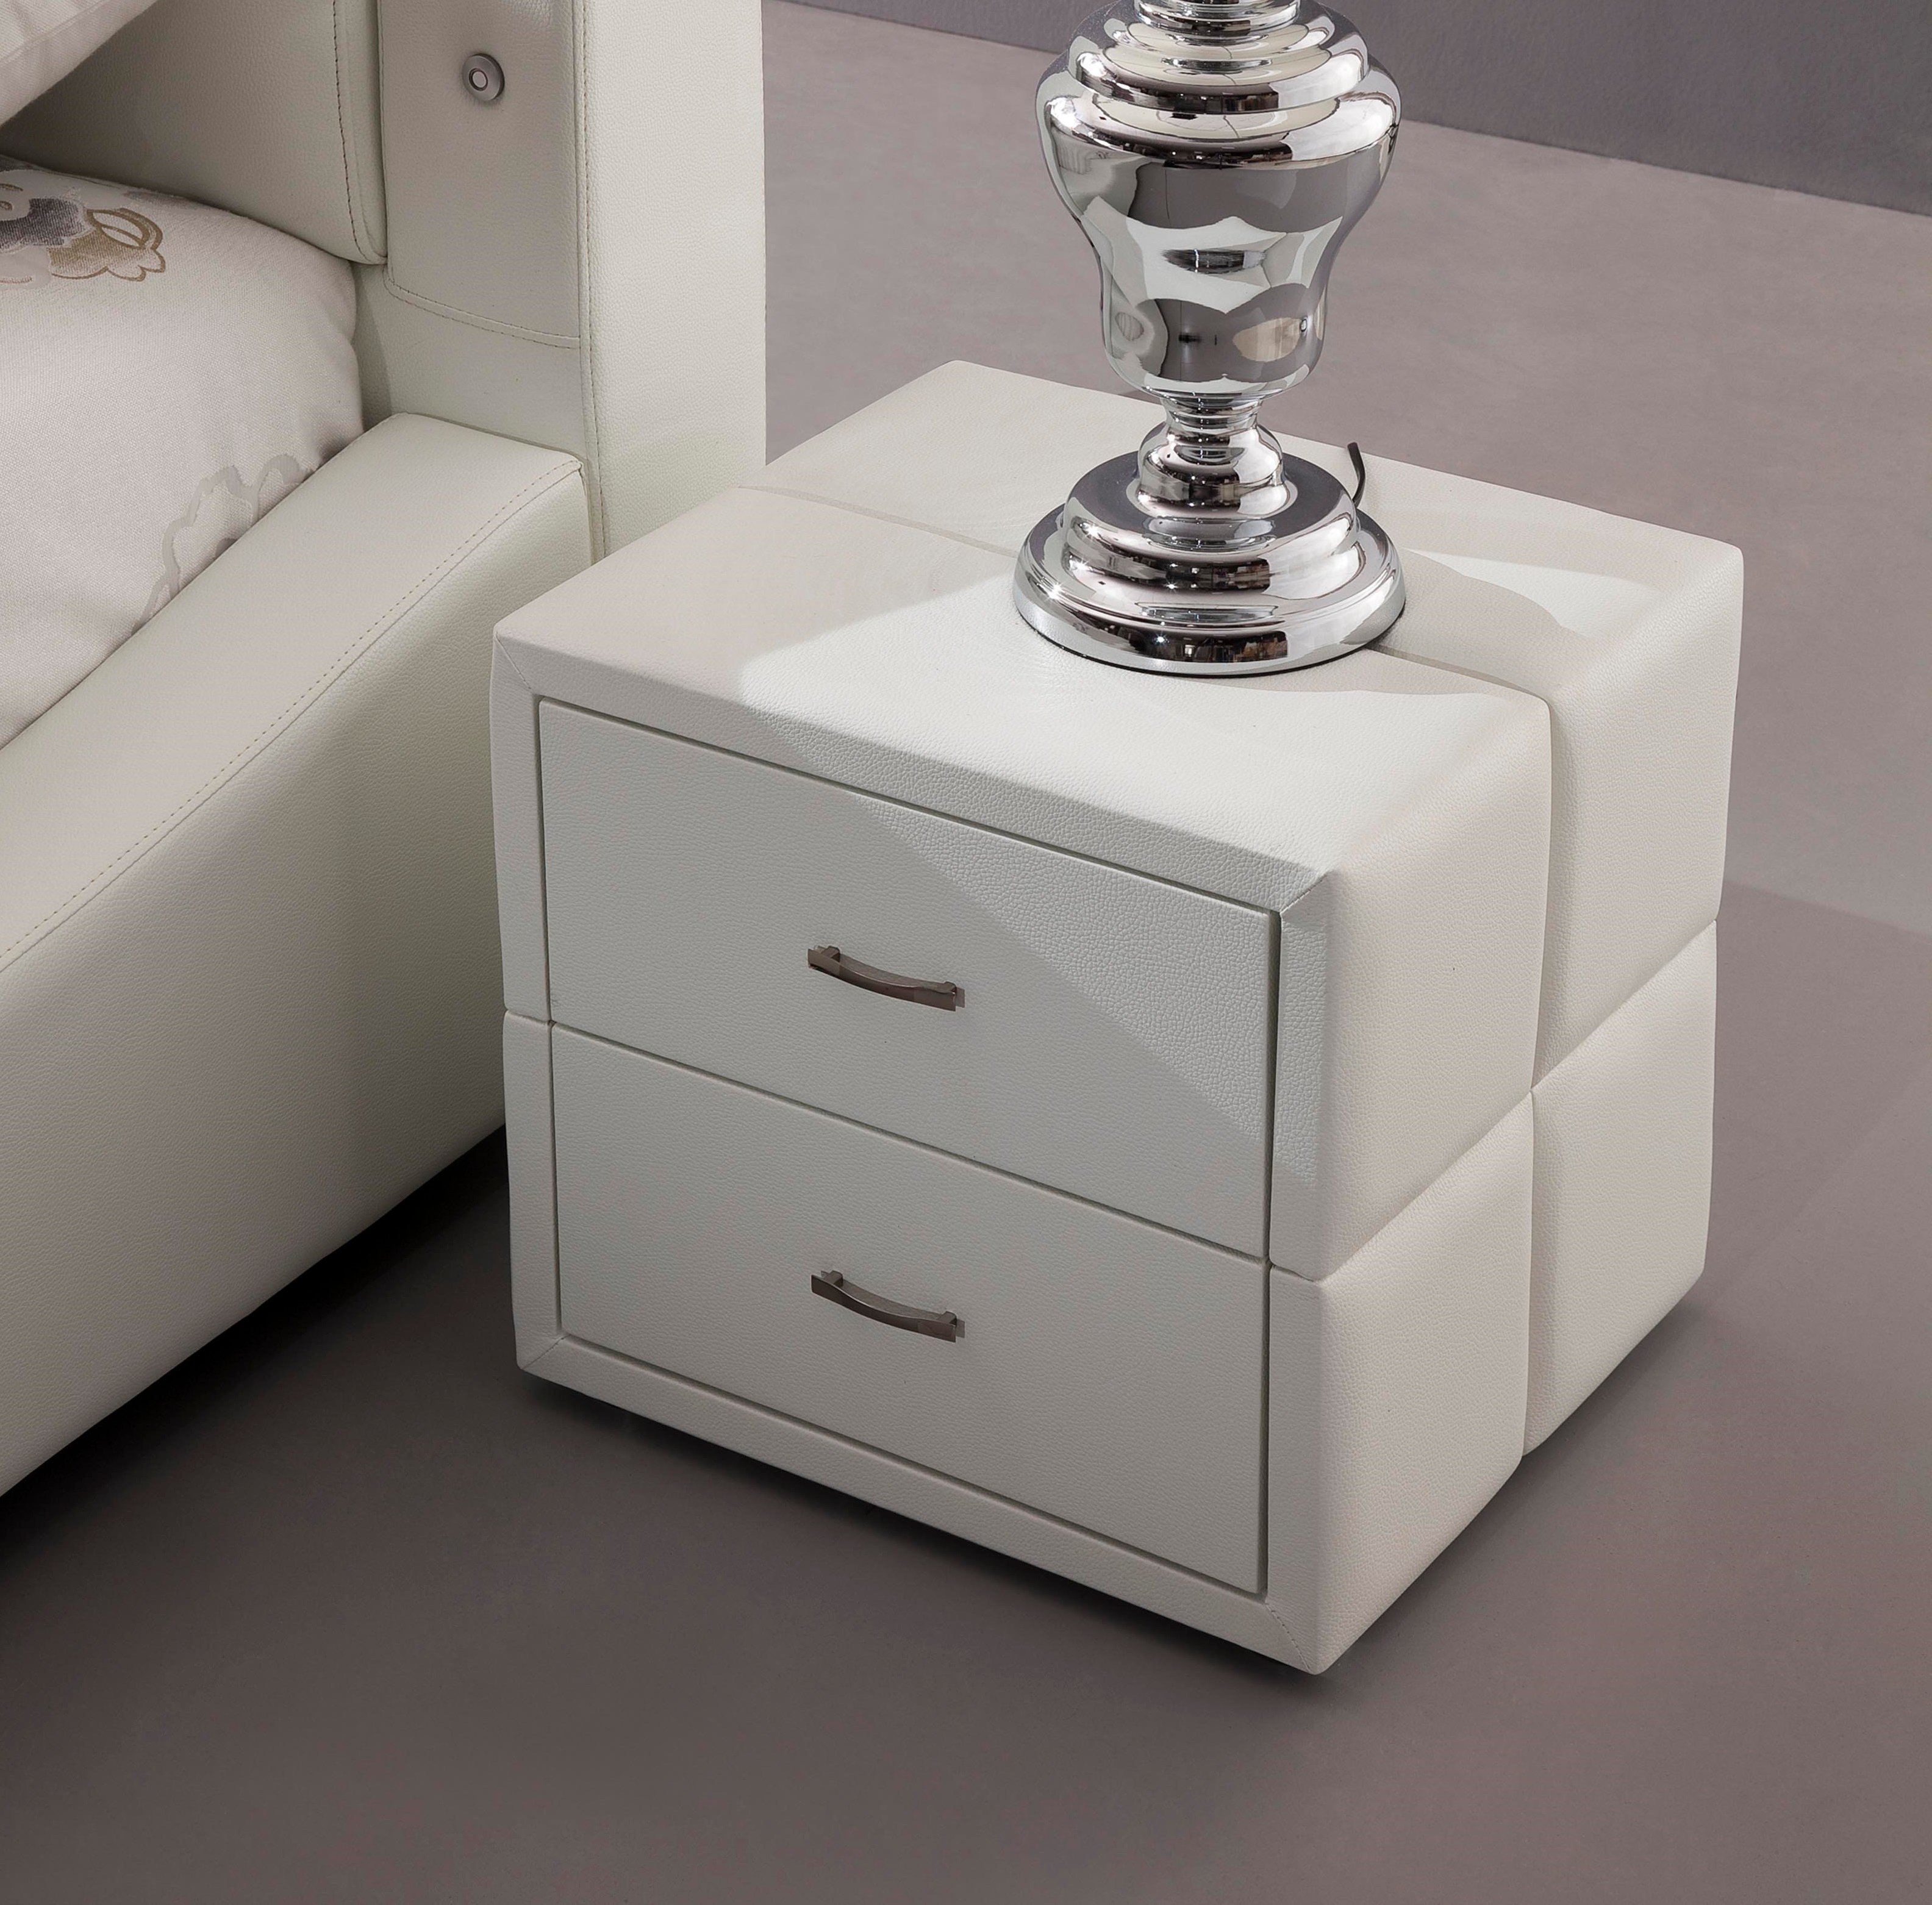 Vespa Contemporary 2 Drawer White Faux Leather Bedside Drawers